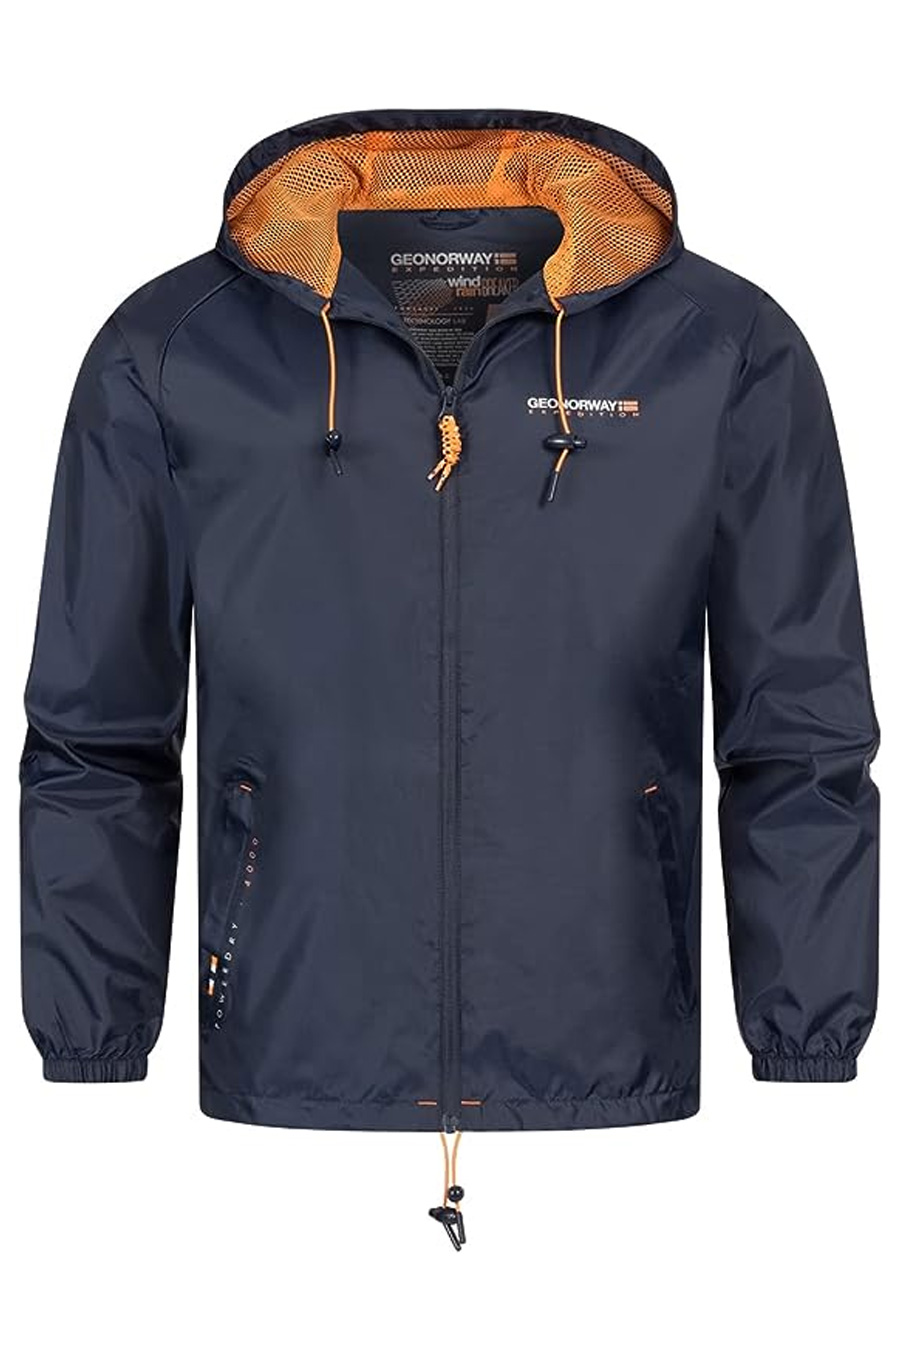 Vihmamantel GEOGRAPHICAL NORWAY BOAT-Navy